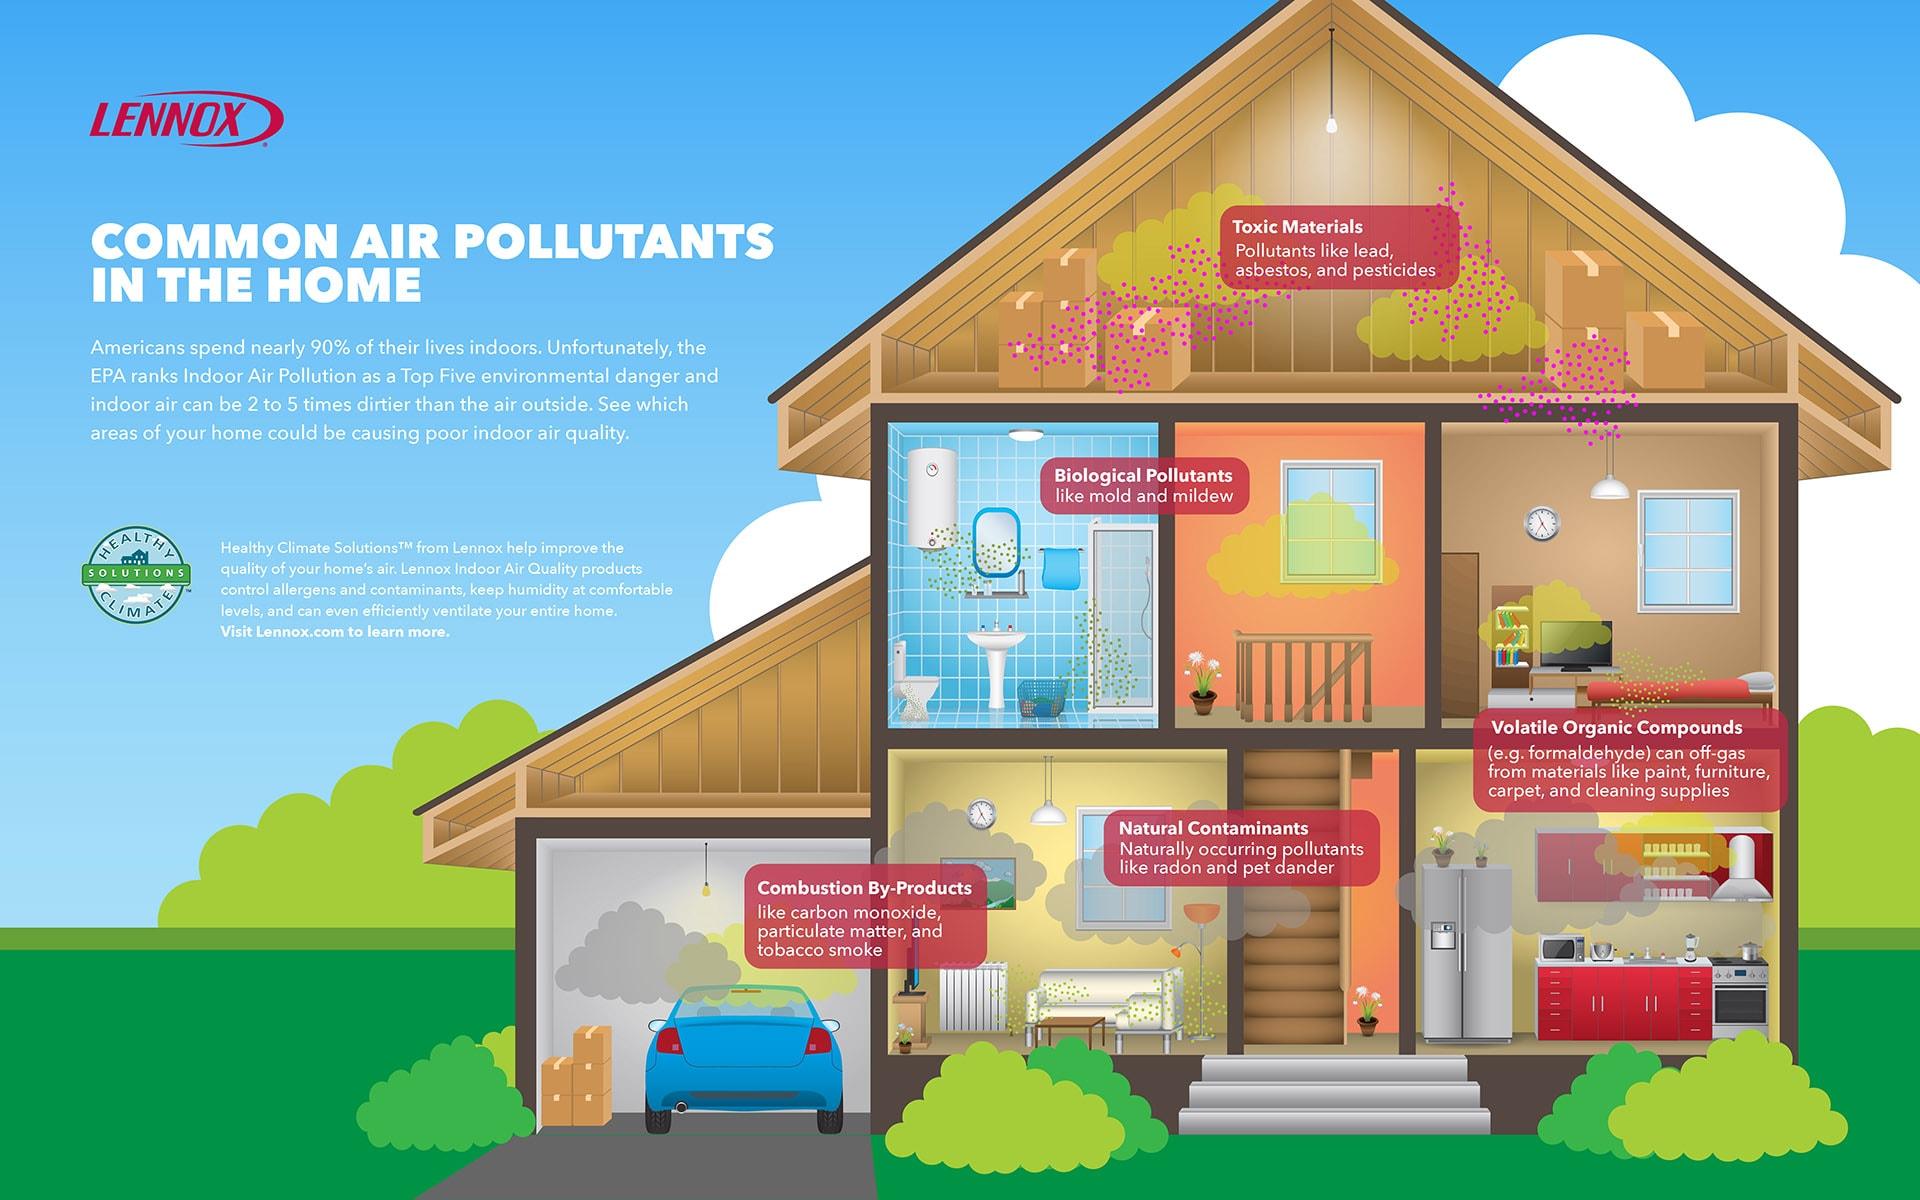 Infographic demonstrating the common air pollutants in the home